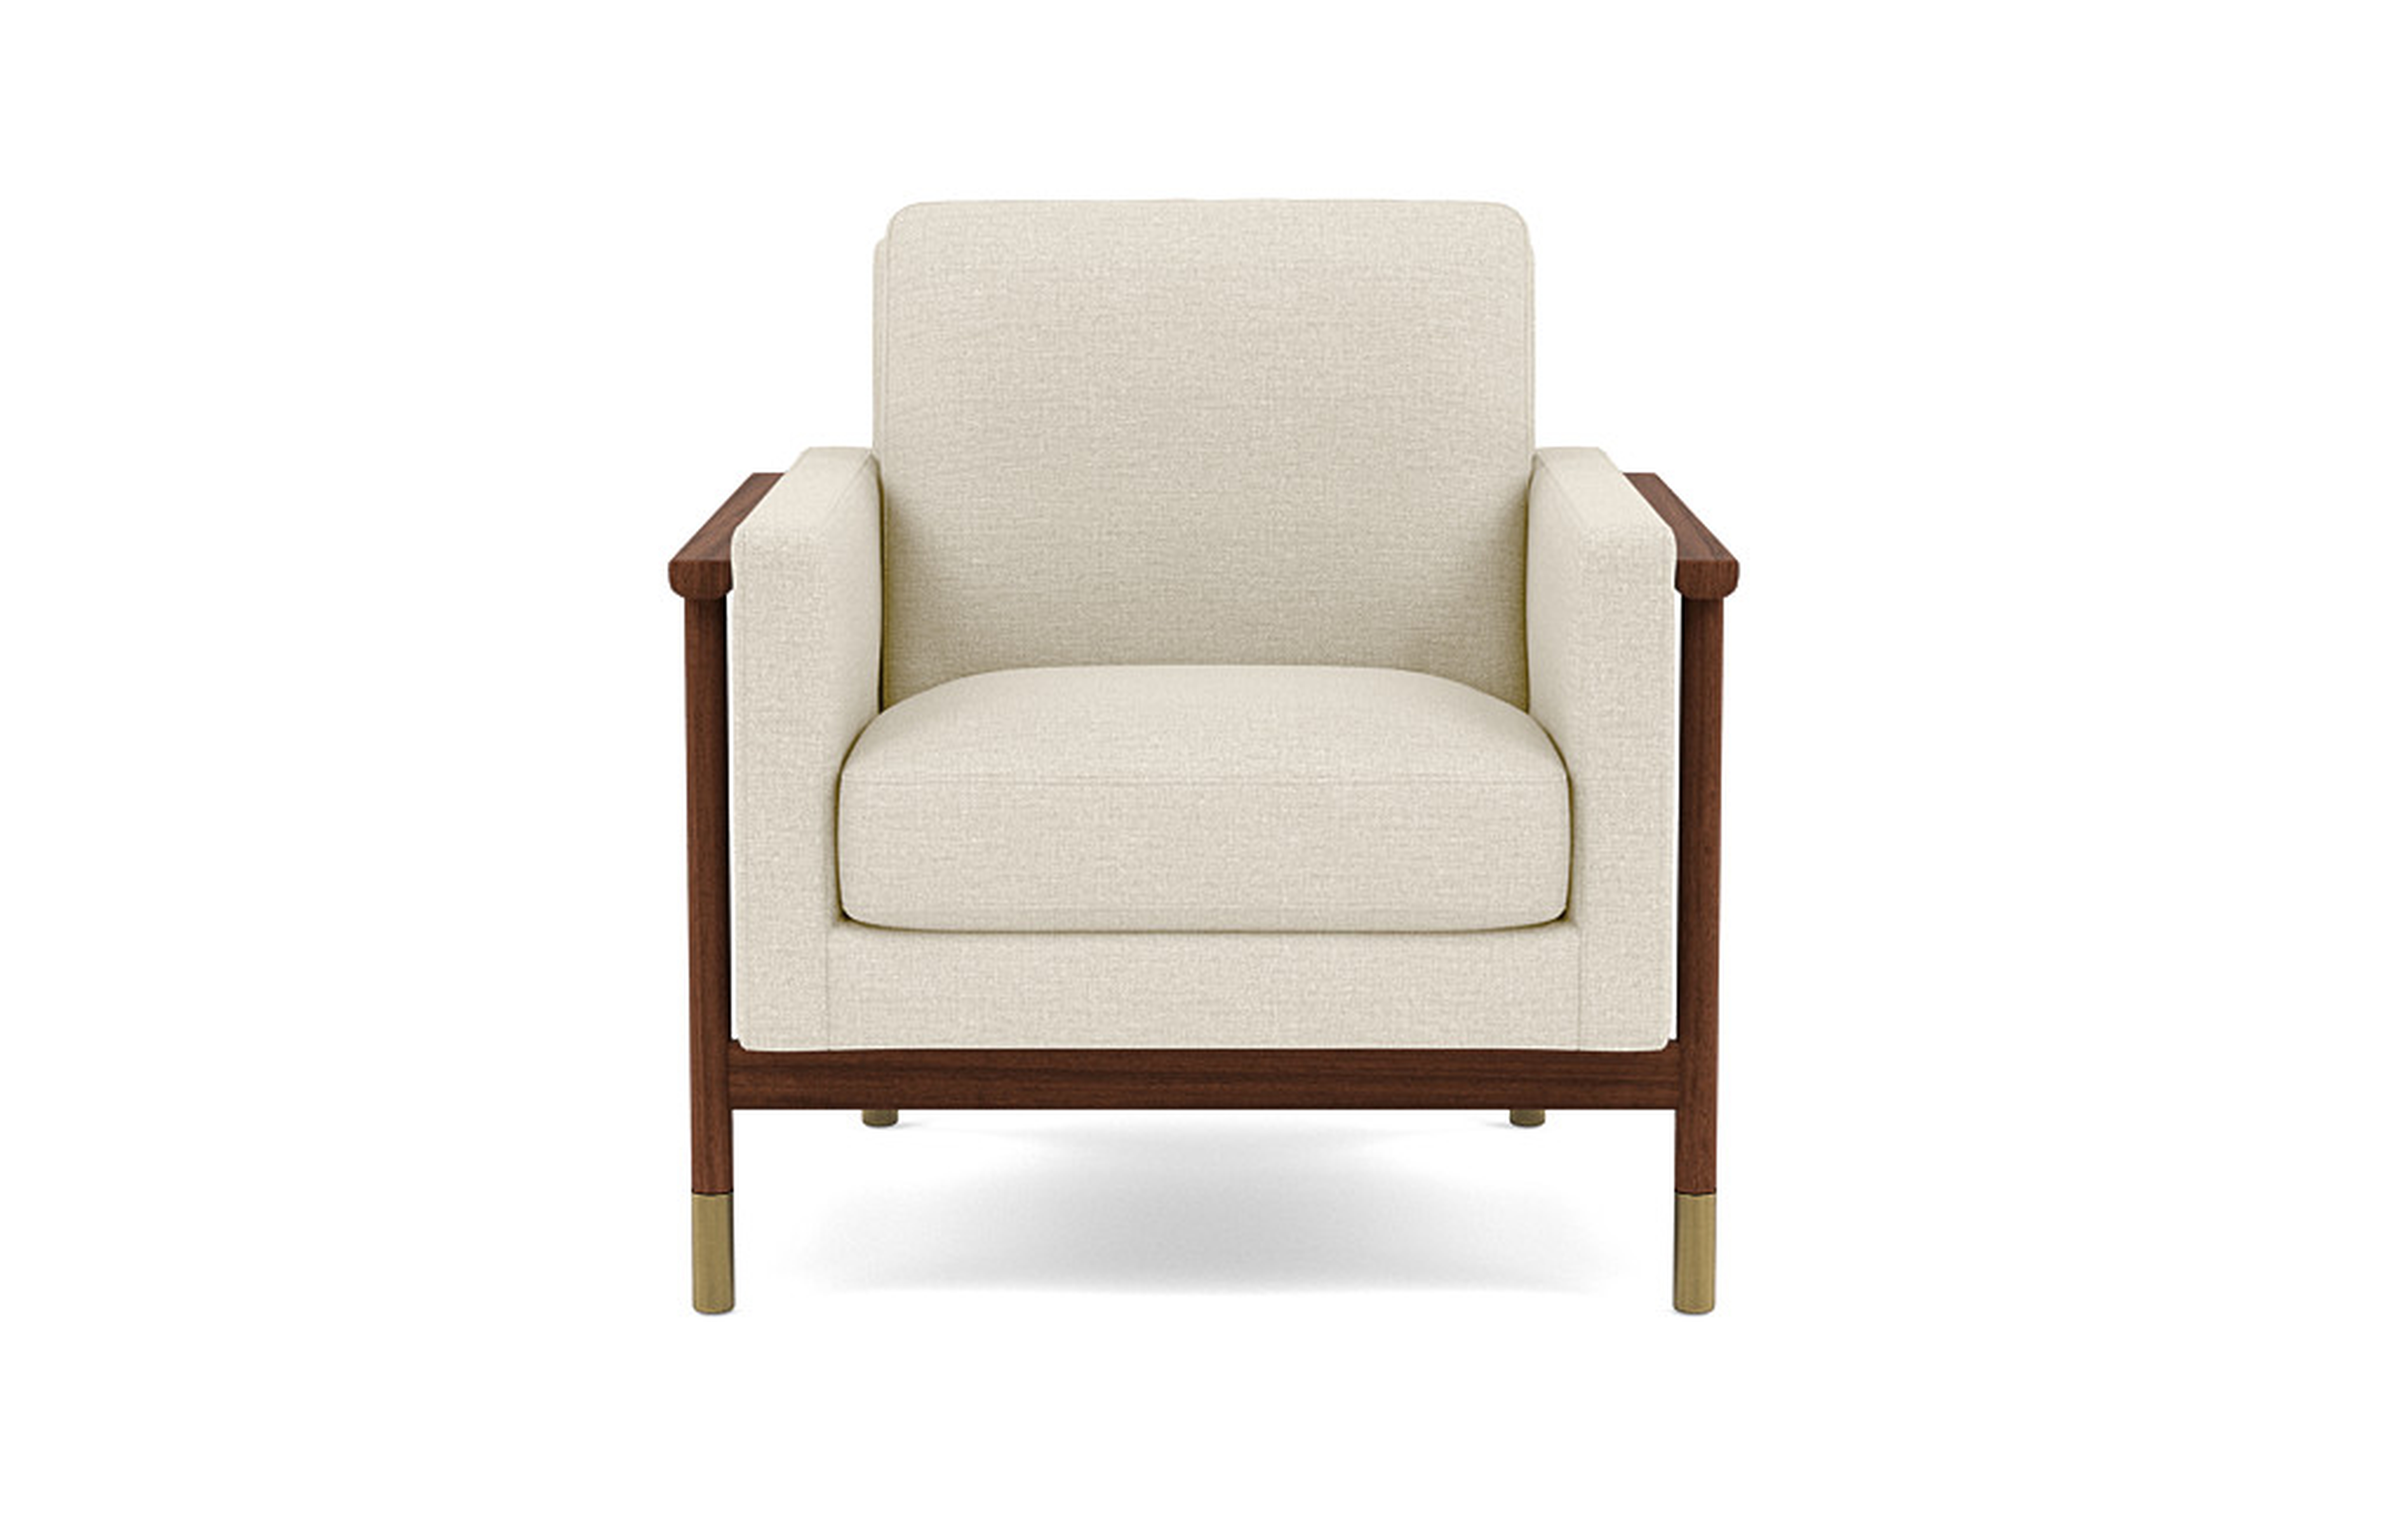 Jason Wu Petite Chair with Oat Performance Pebble Knit and Oiled Walnut with Brass Cap legs - Interior Define